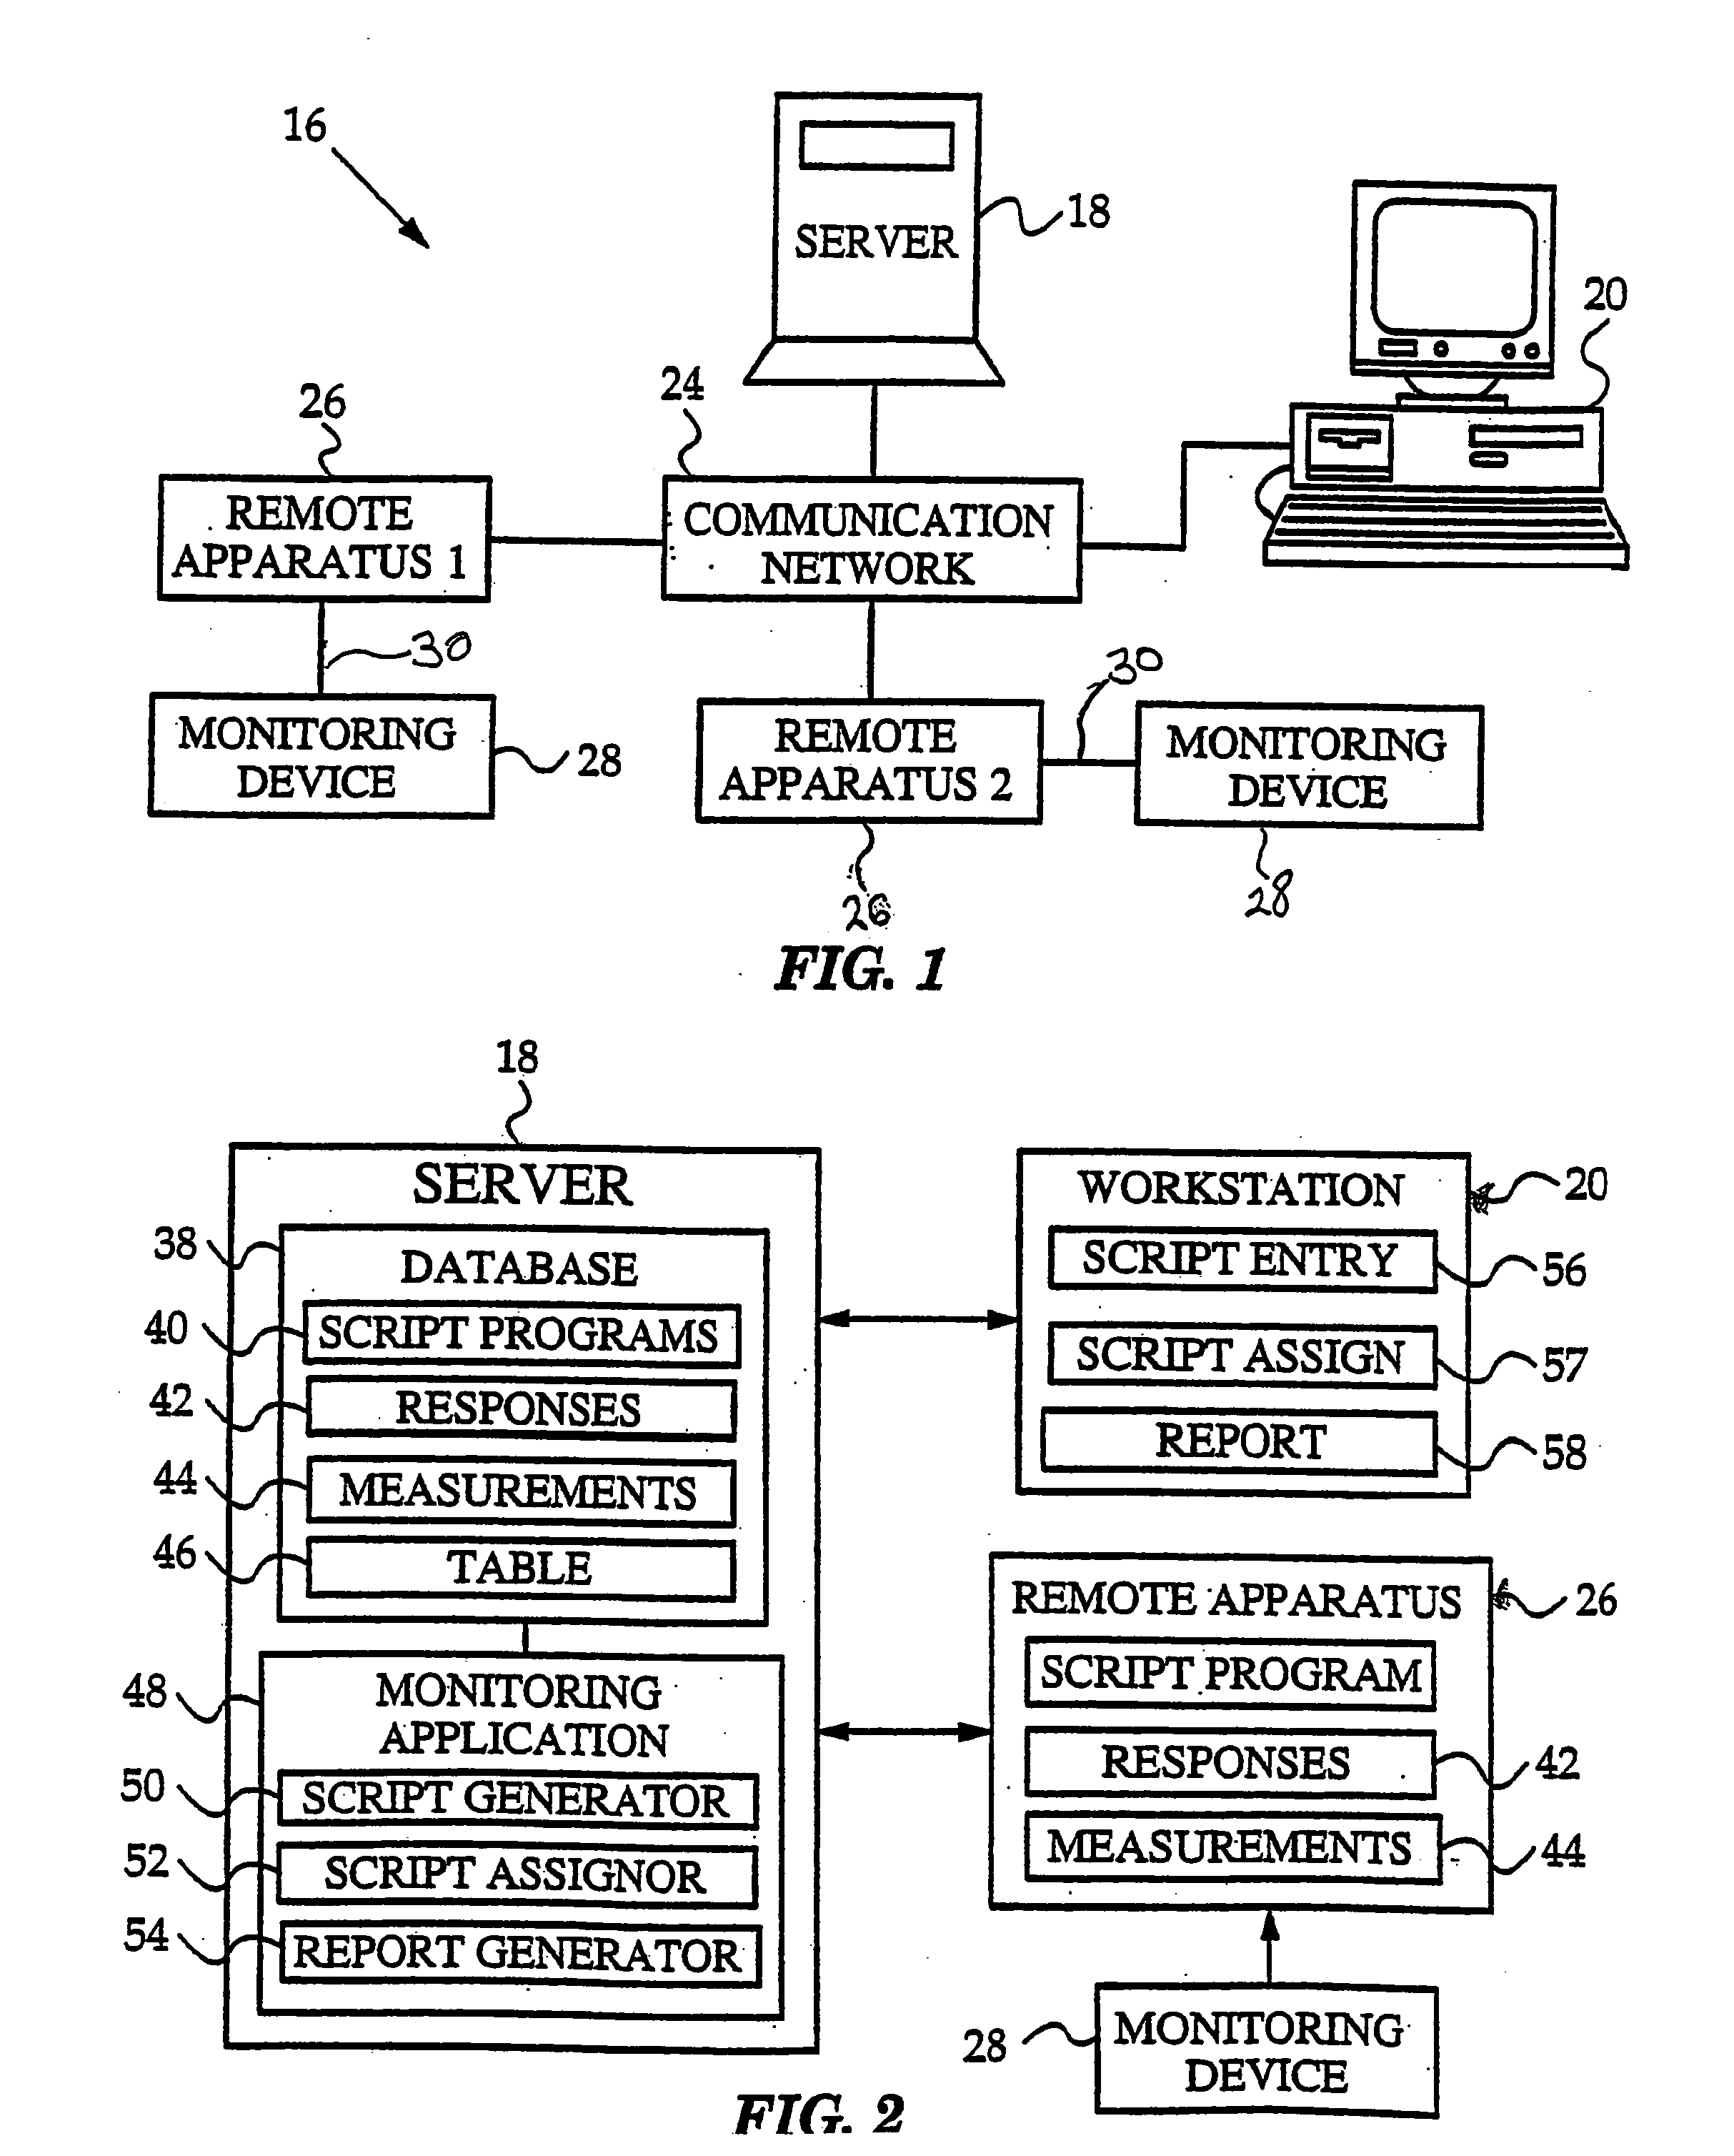 Remotely monitoring an individual using scripted communications